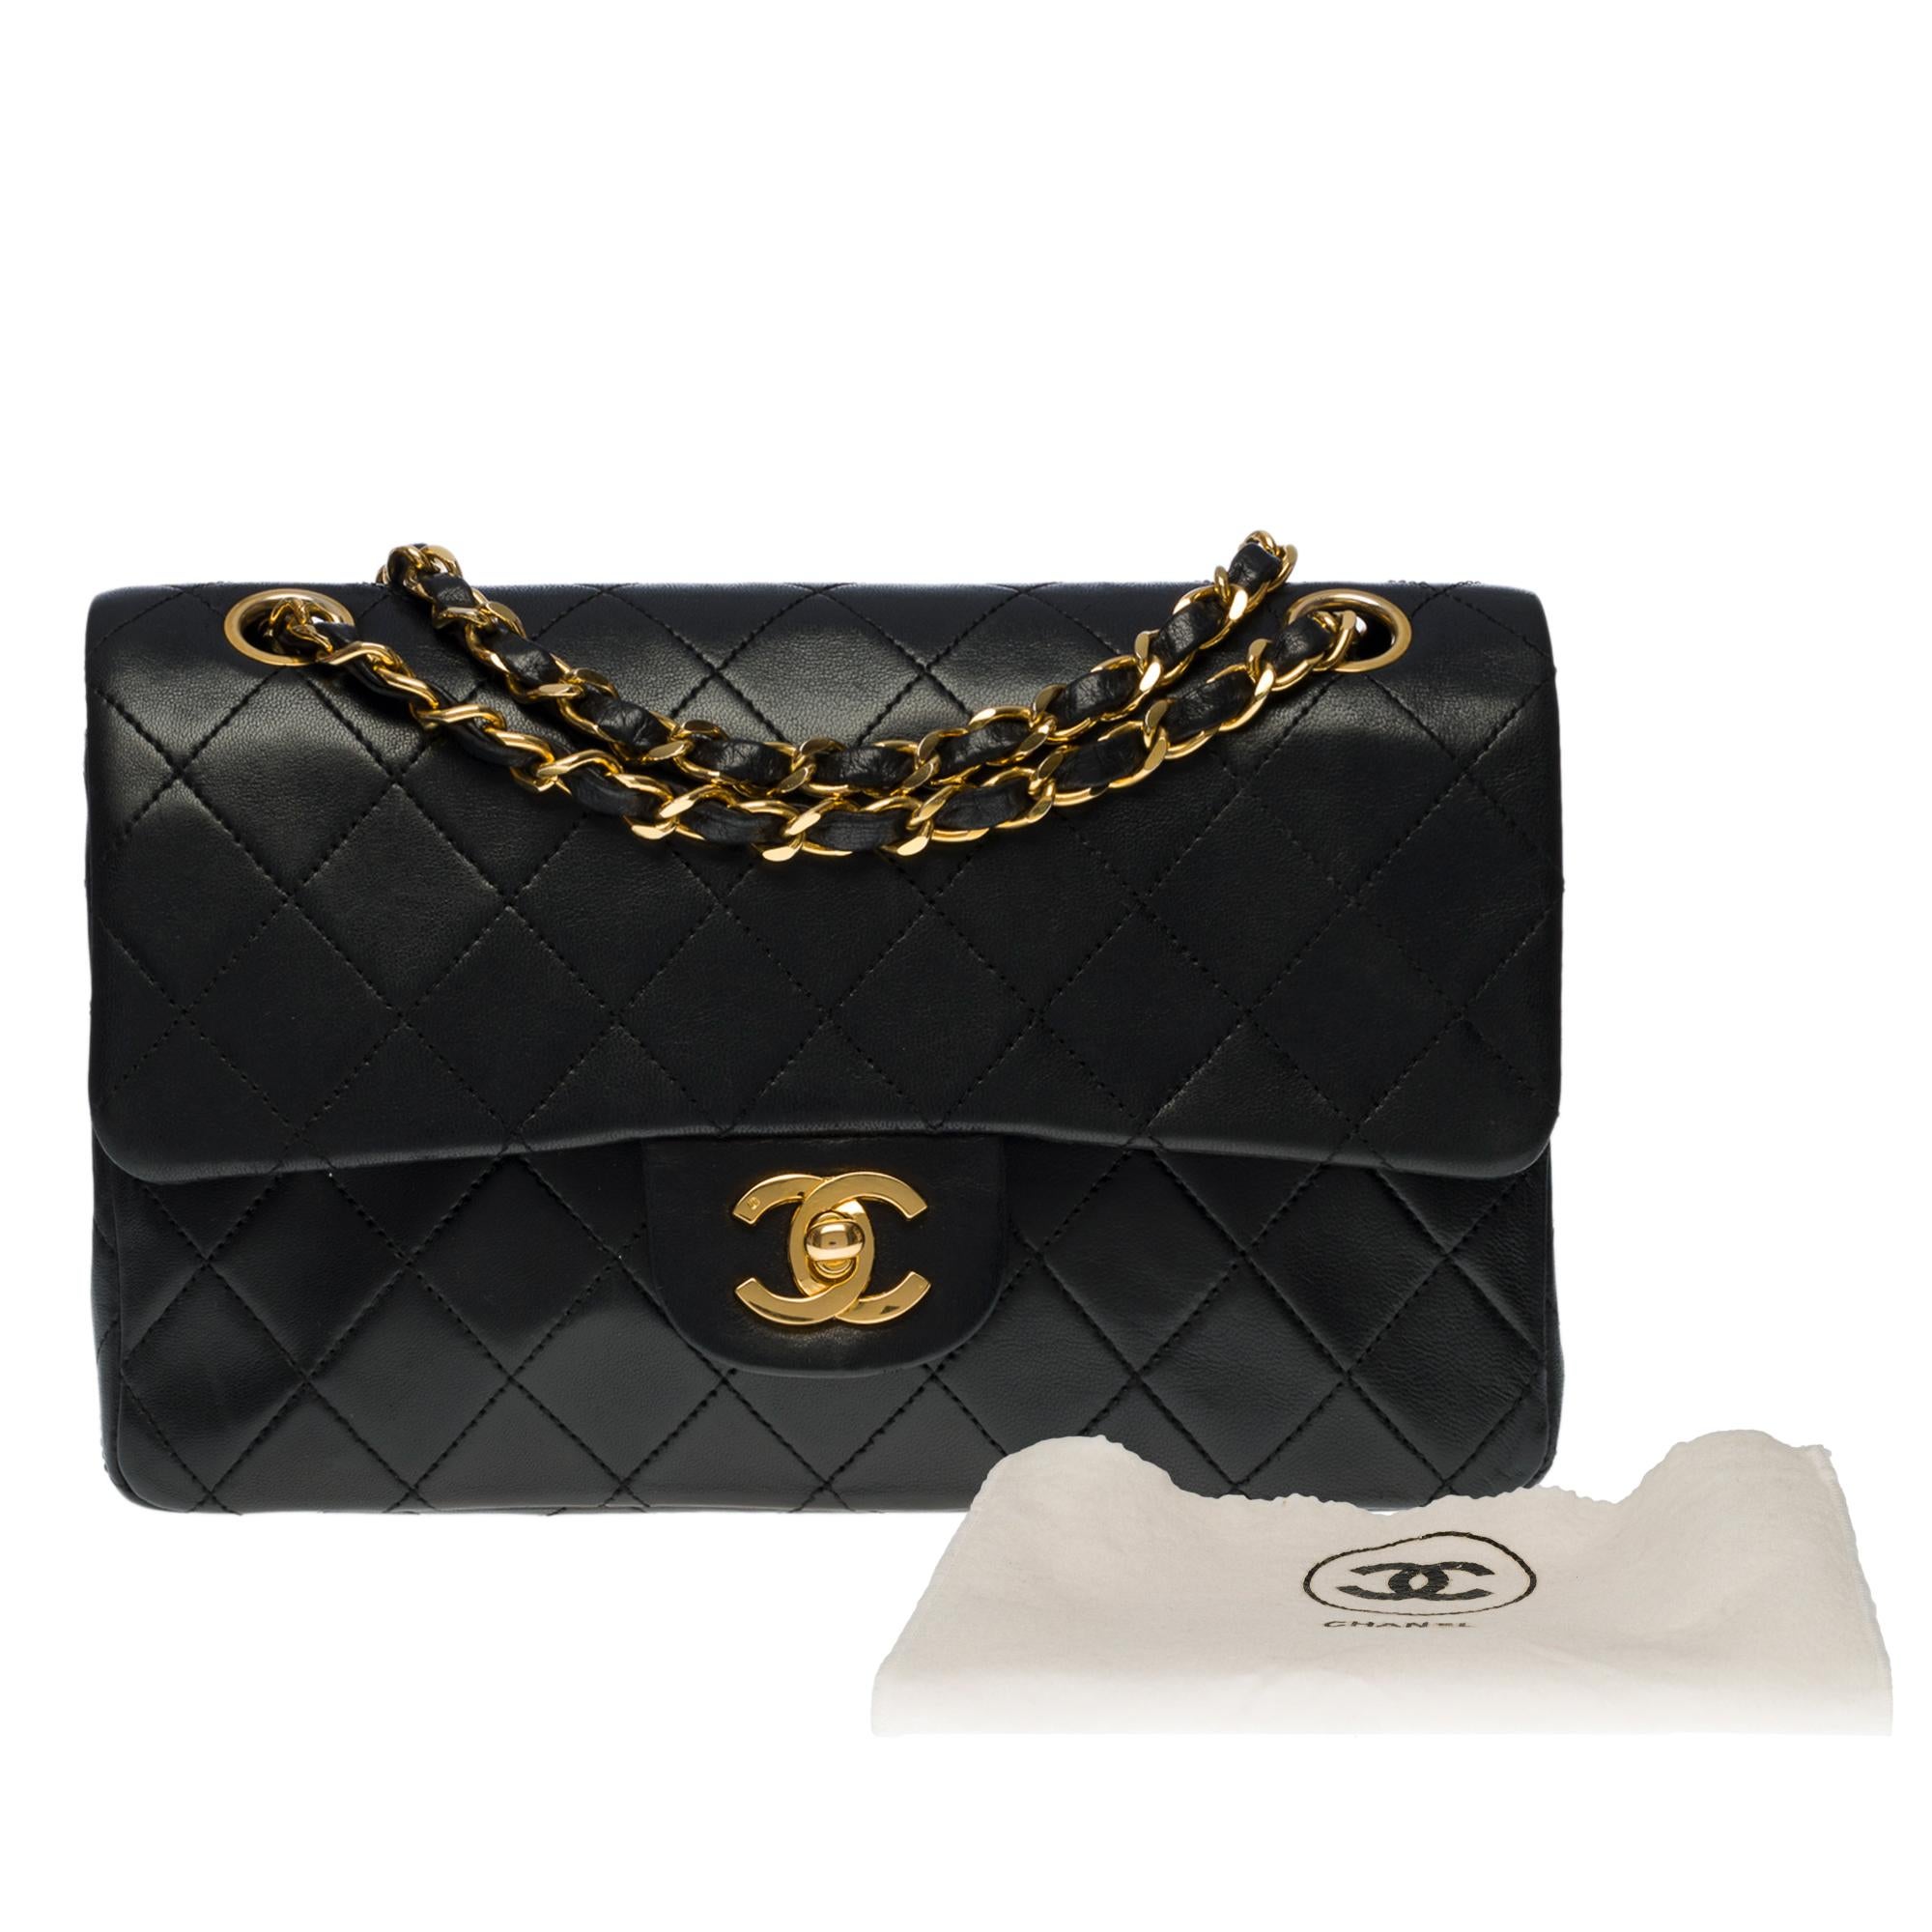 Chanel Coco Timeless 23cm double flap shoulder bag in black quilted lambskin, GHW 3